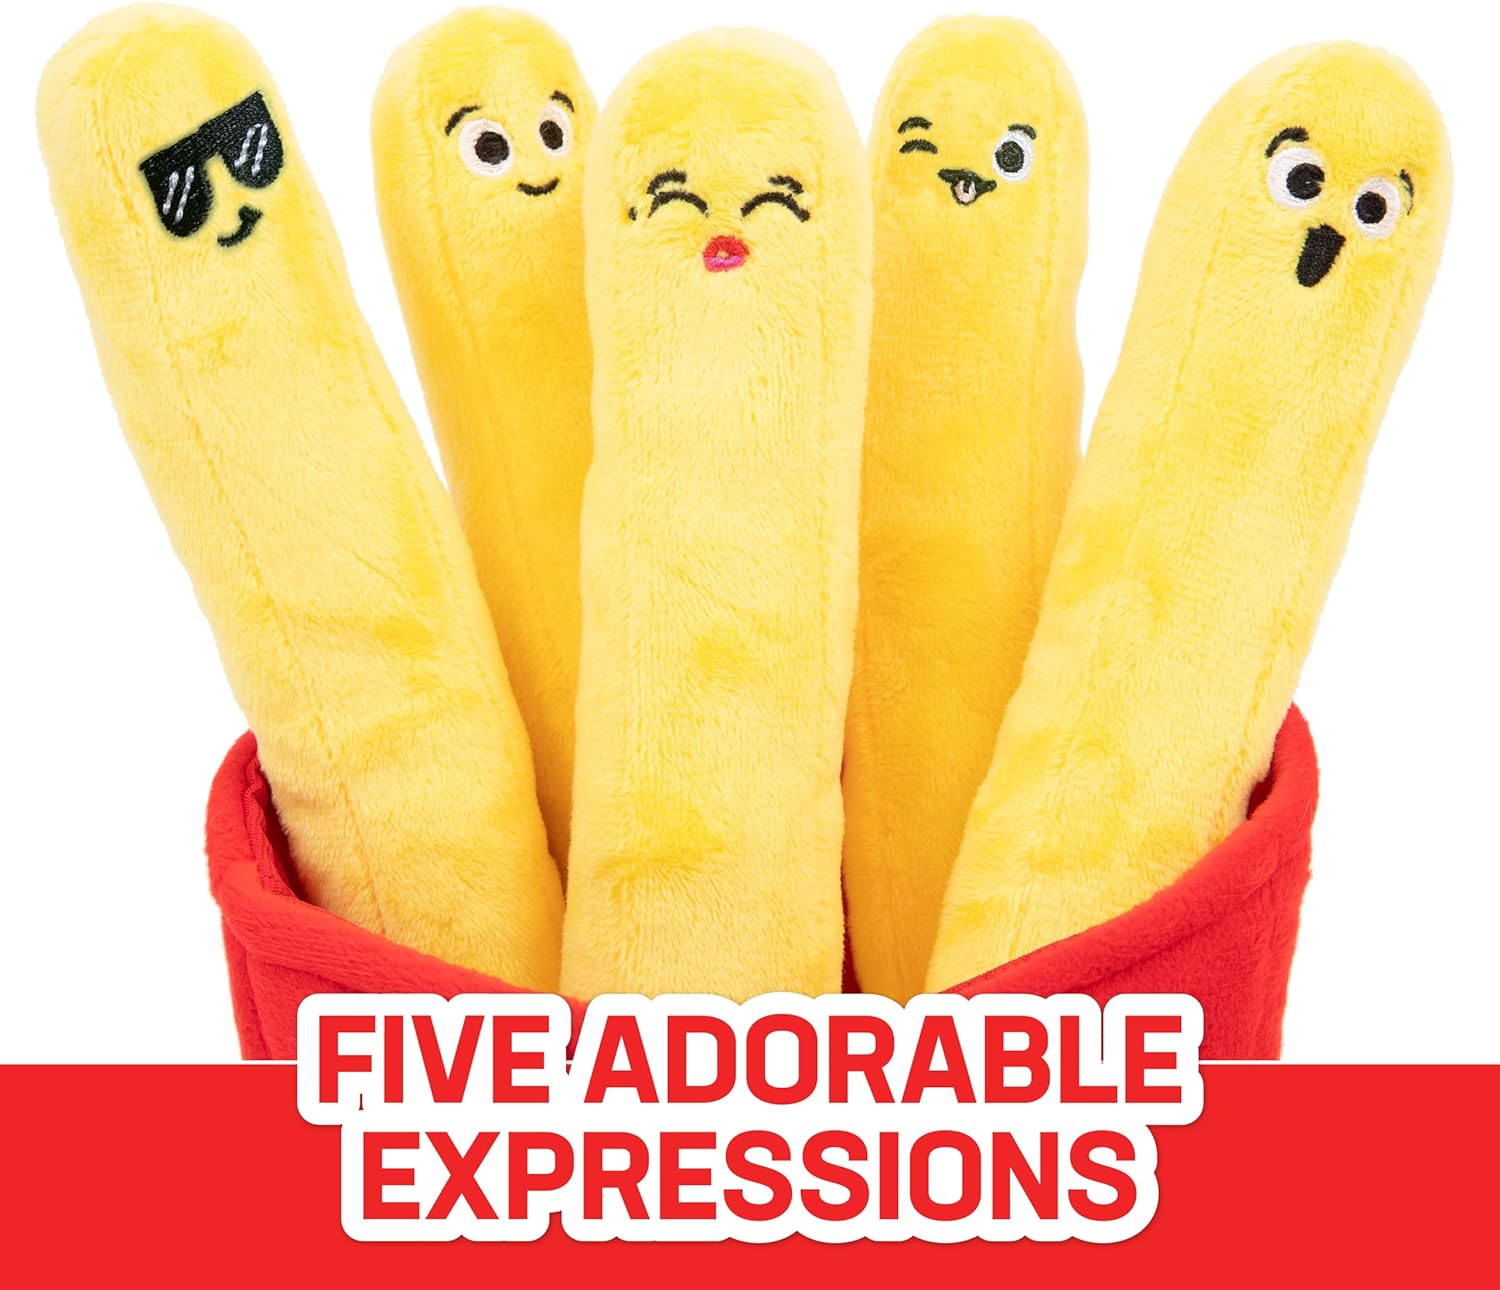 Emotional Support Fries - the Original Viral Cuddly Plush Comfort Food